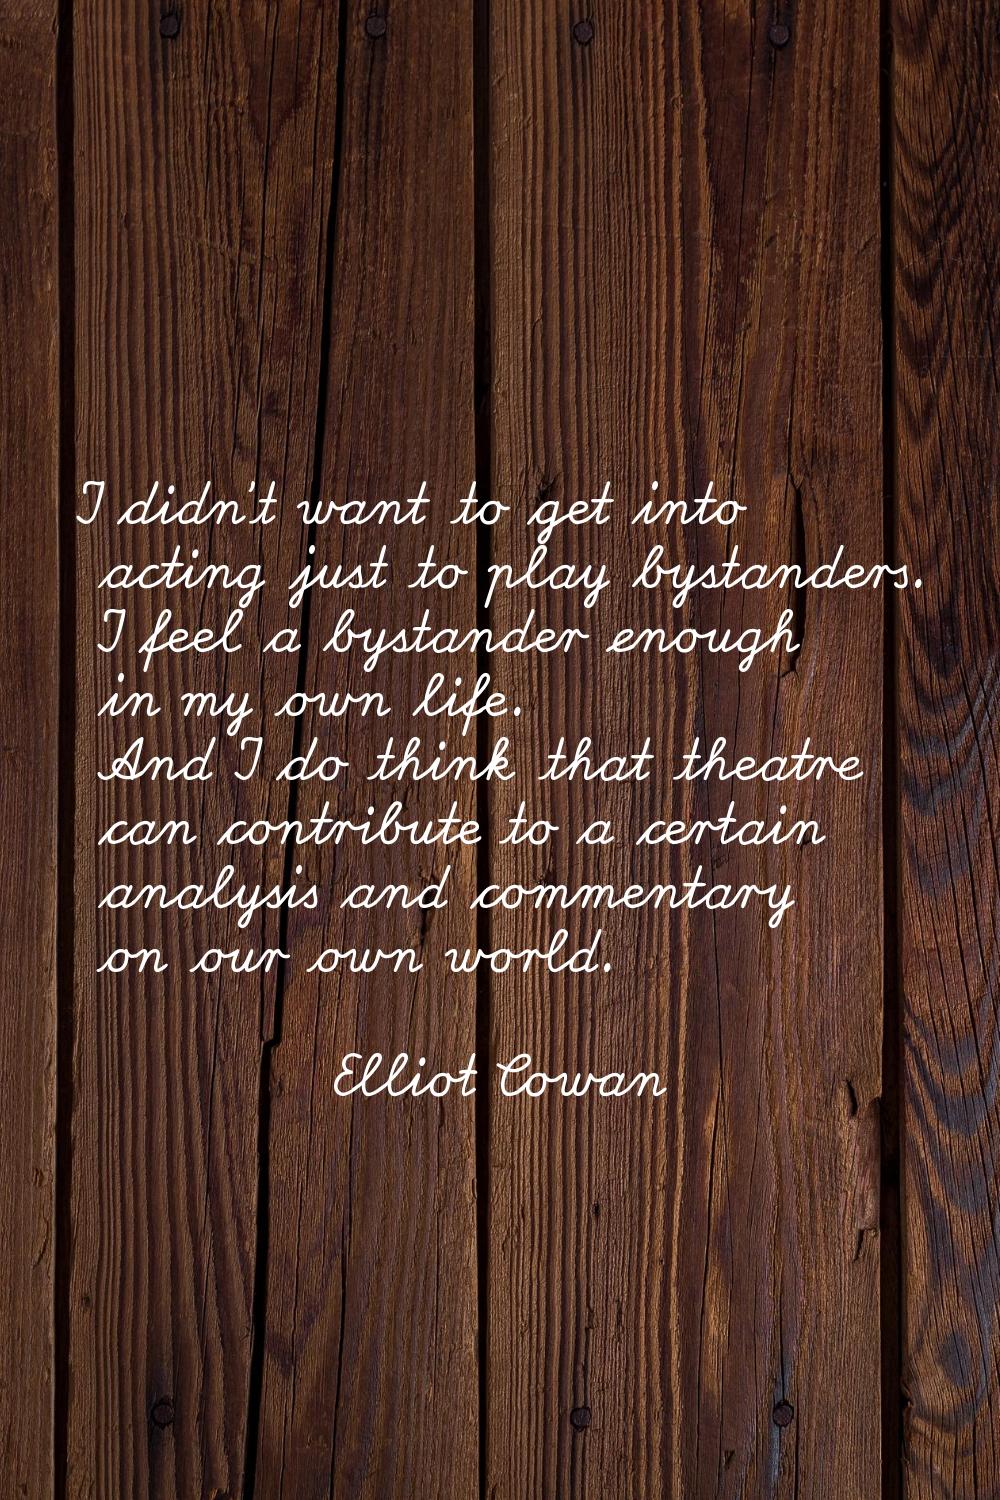 I didn't want to get into acting just to play bystanders. I feel a bystander enough in my own life.